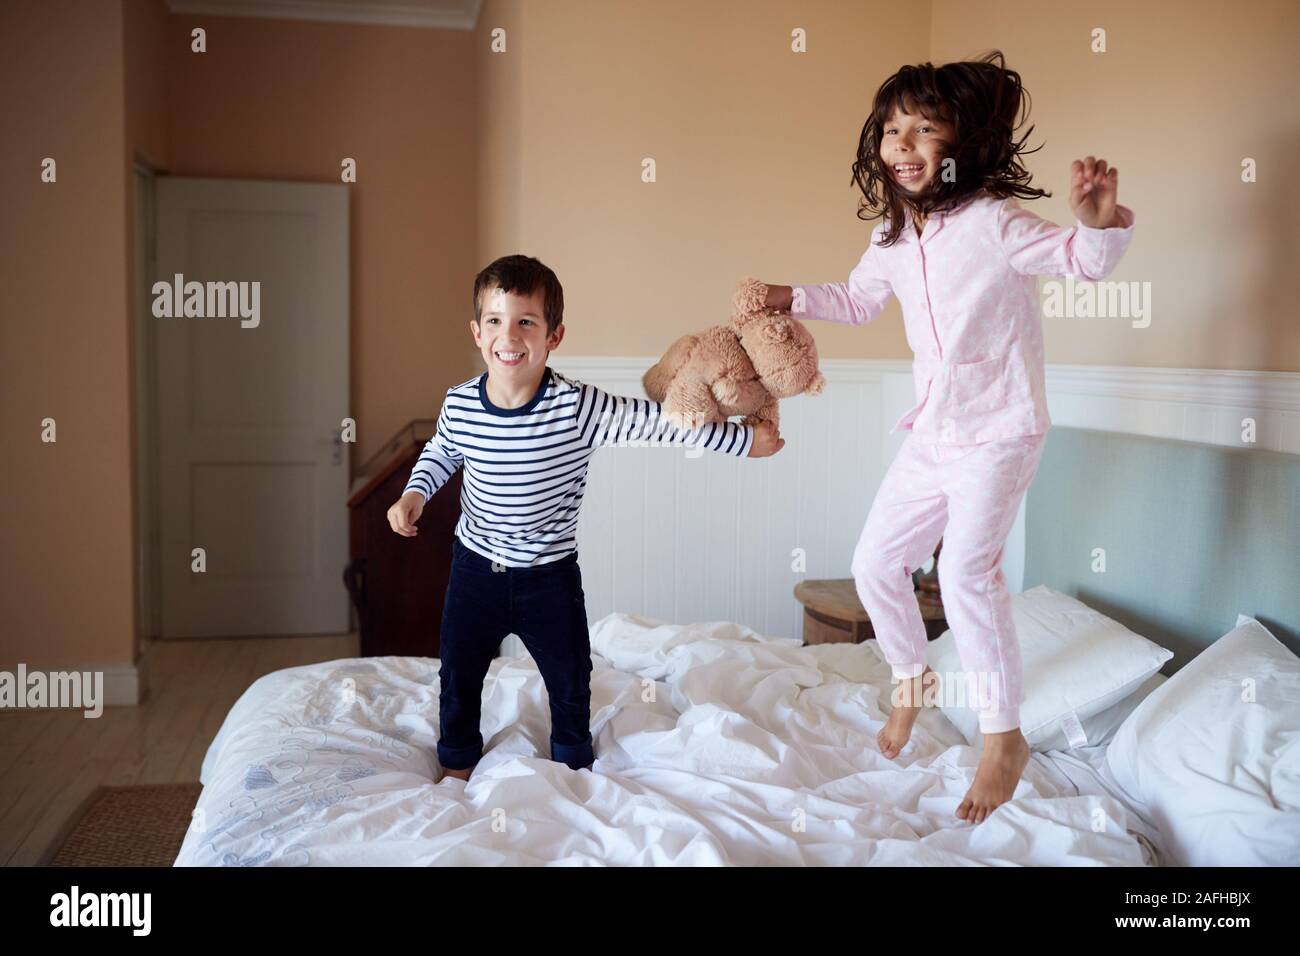 Brother and sister having fun bouncing on their parents’ bed in their pyjamas, full length Stock Photo